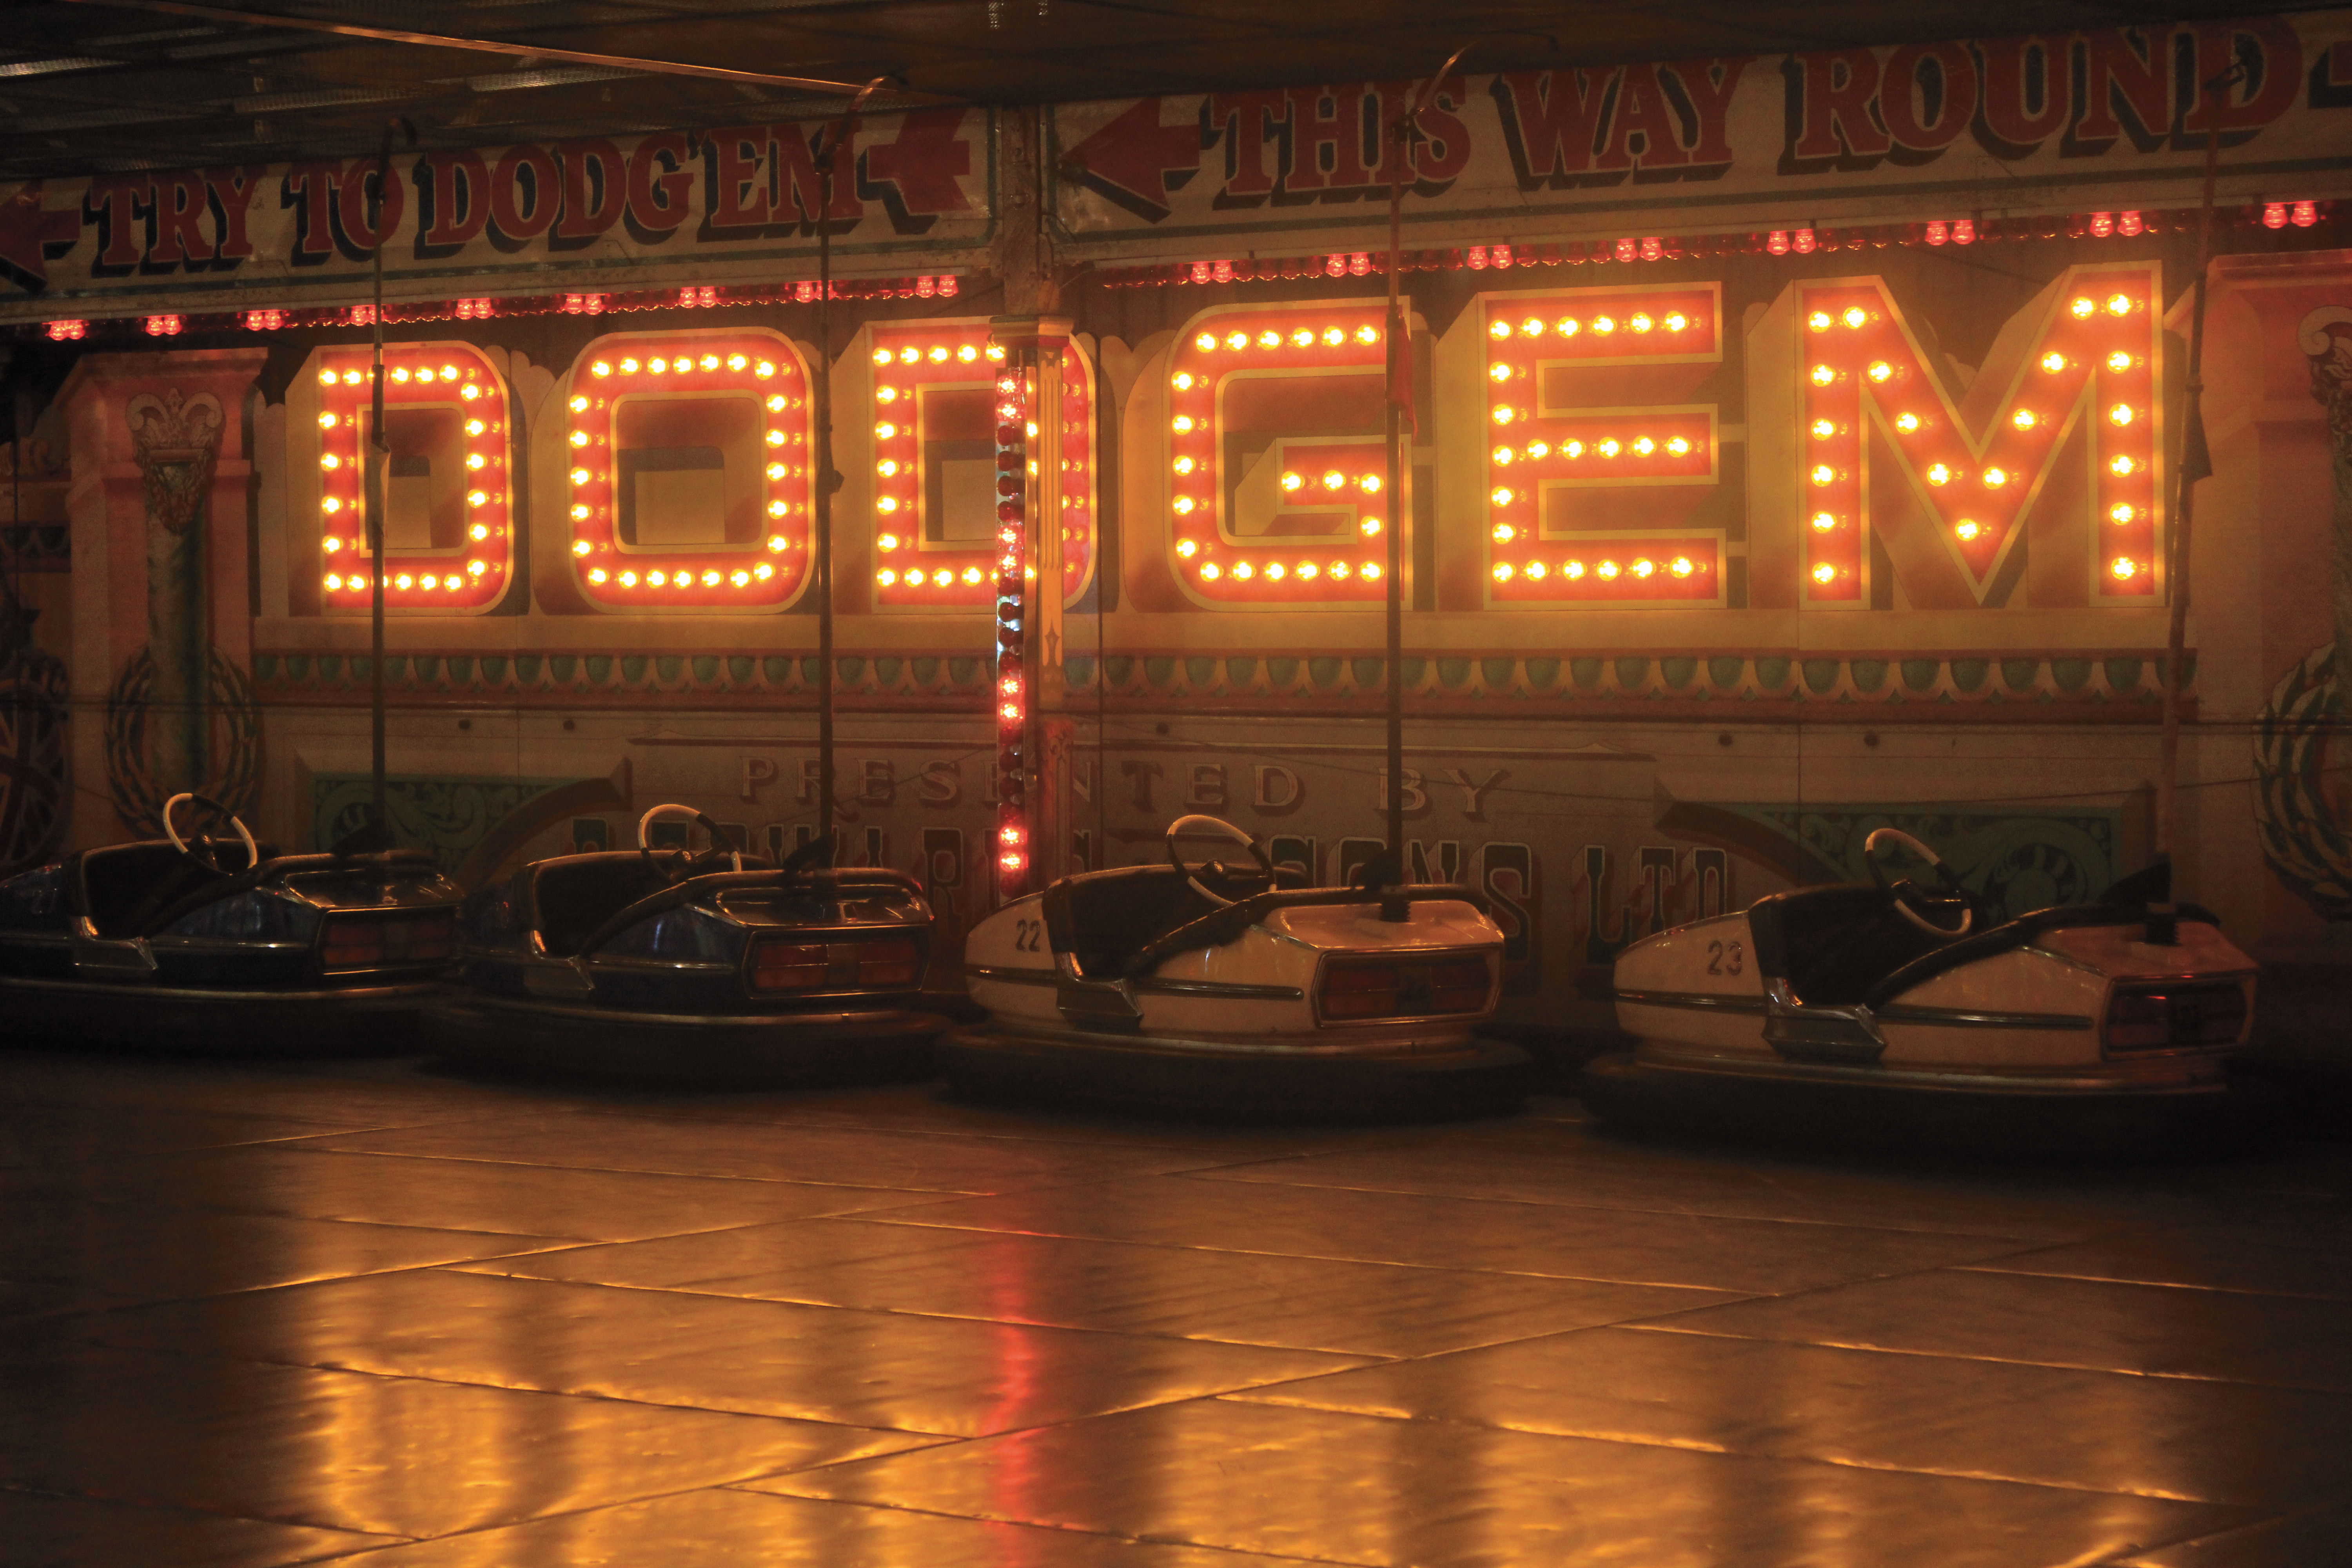 Shooting in dim light at a raised sensitivity setting, the 2000D has done a good job of capturing this antique dodgem ride. 55mm, 1/80sec at f/5.6, ISO 1600 